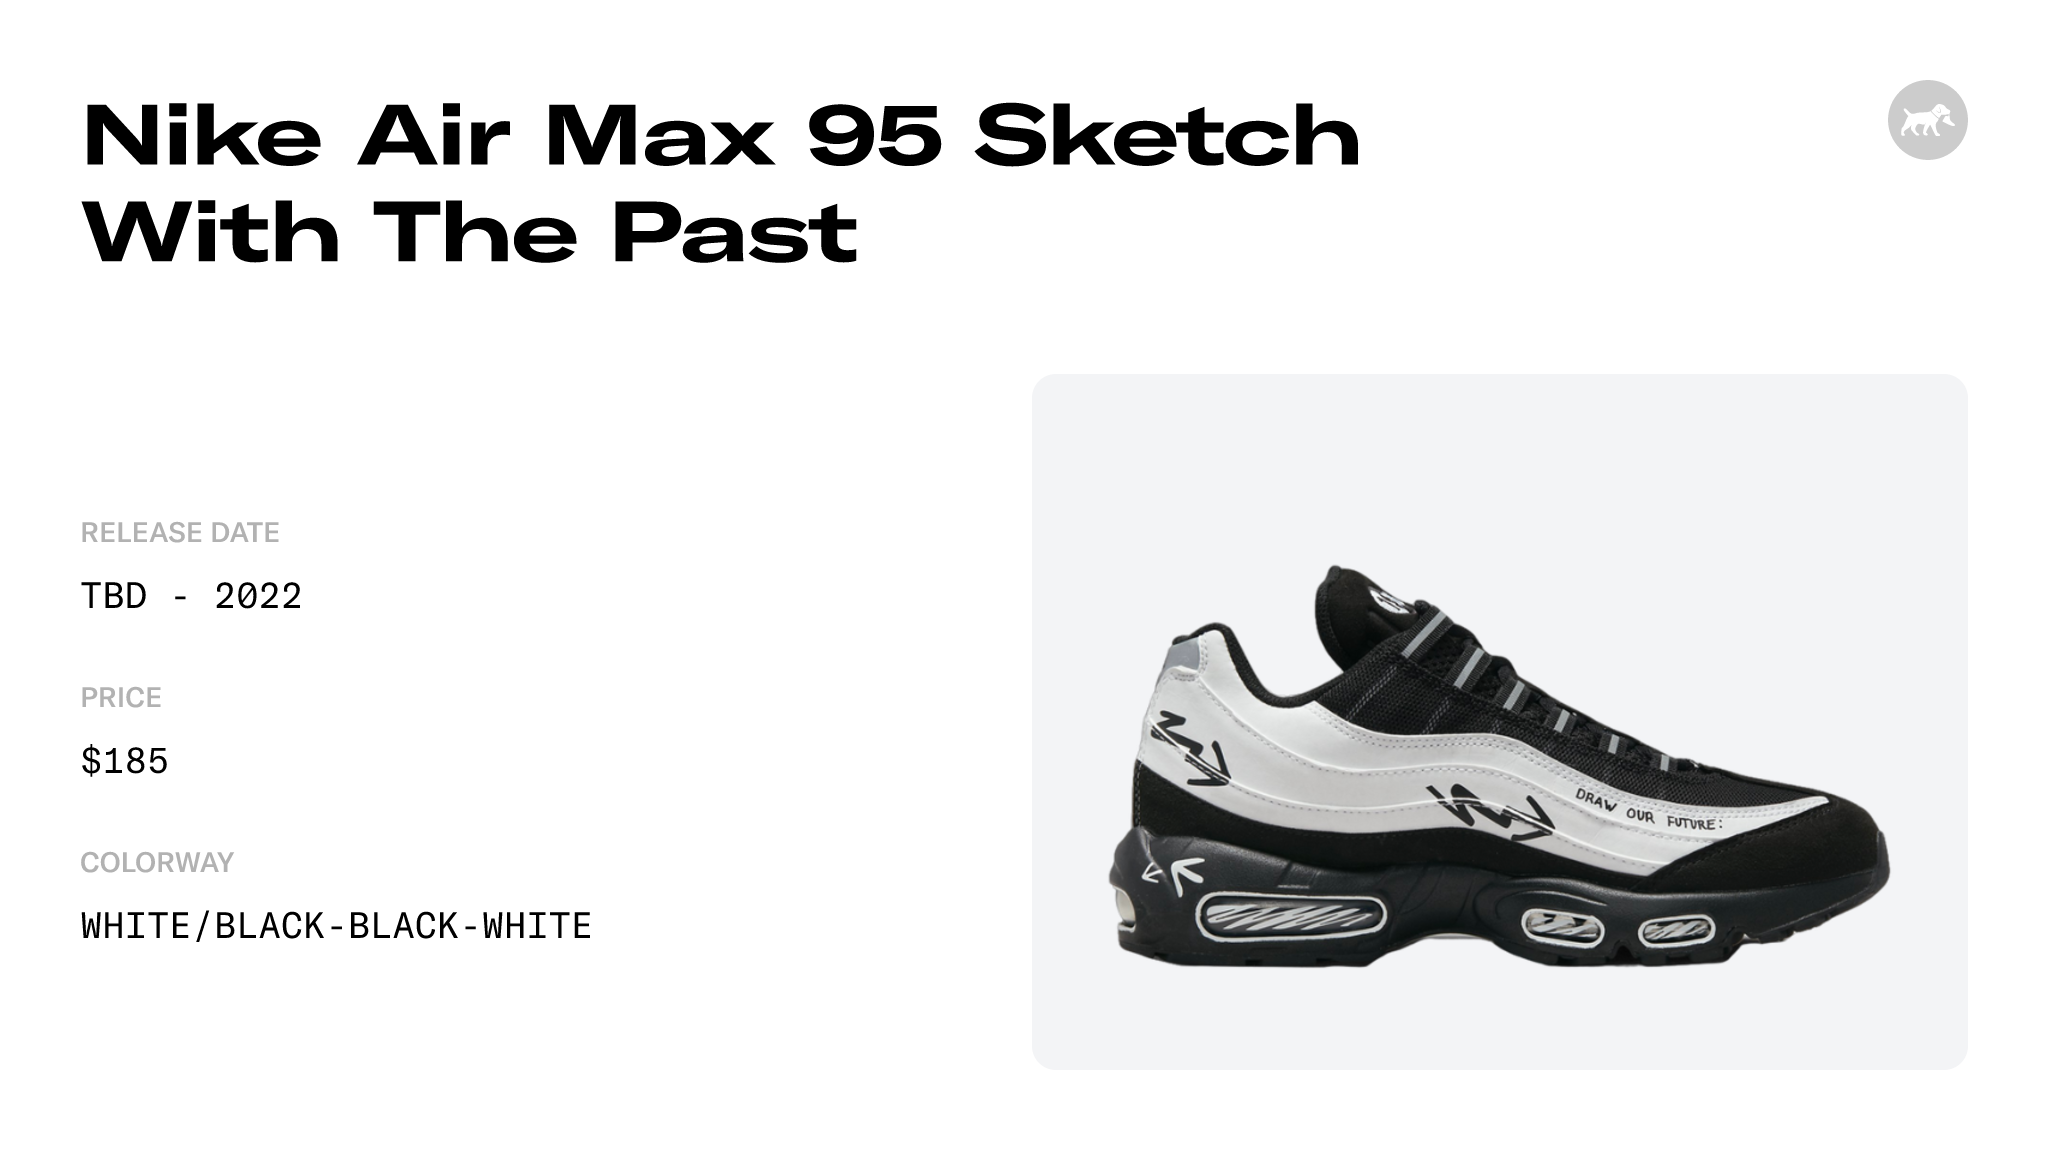 Nike Air Max 95 Sketch With The Past - DX4615-100 Raffles and 